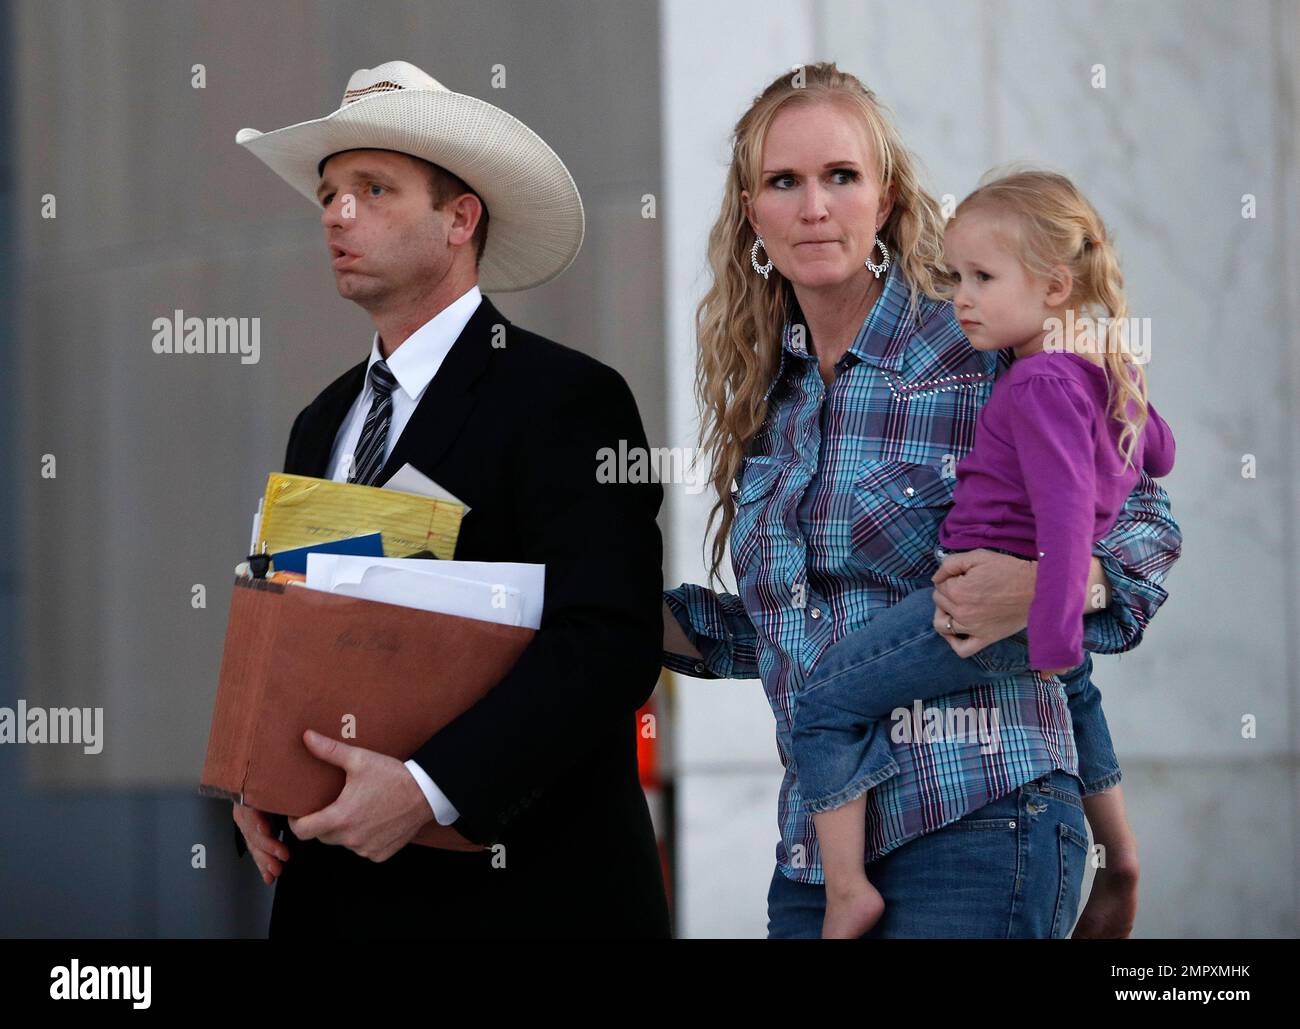 Ryan Bundy, left, walks out of federal court with his wife Angela Bundy,  Tuesday, Nov. 14, 2017, in Las Vegas. Ryan Bundy, along with his father  Cliven Bundy, brother Ammon Bundy, and